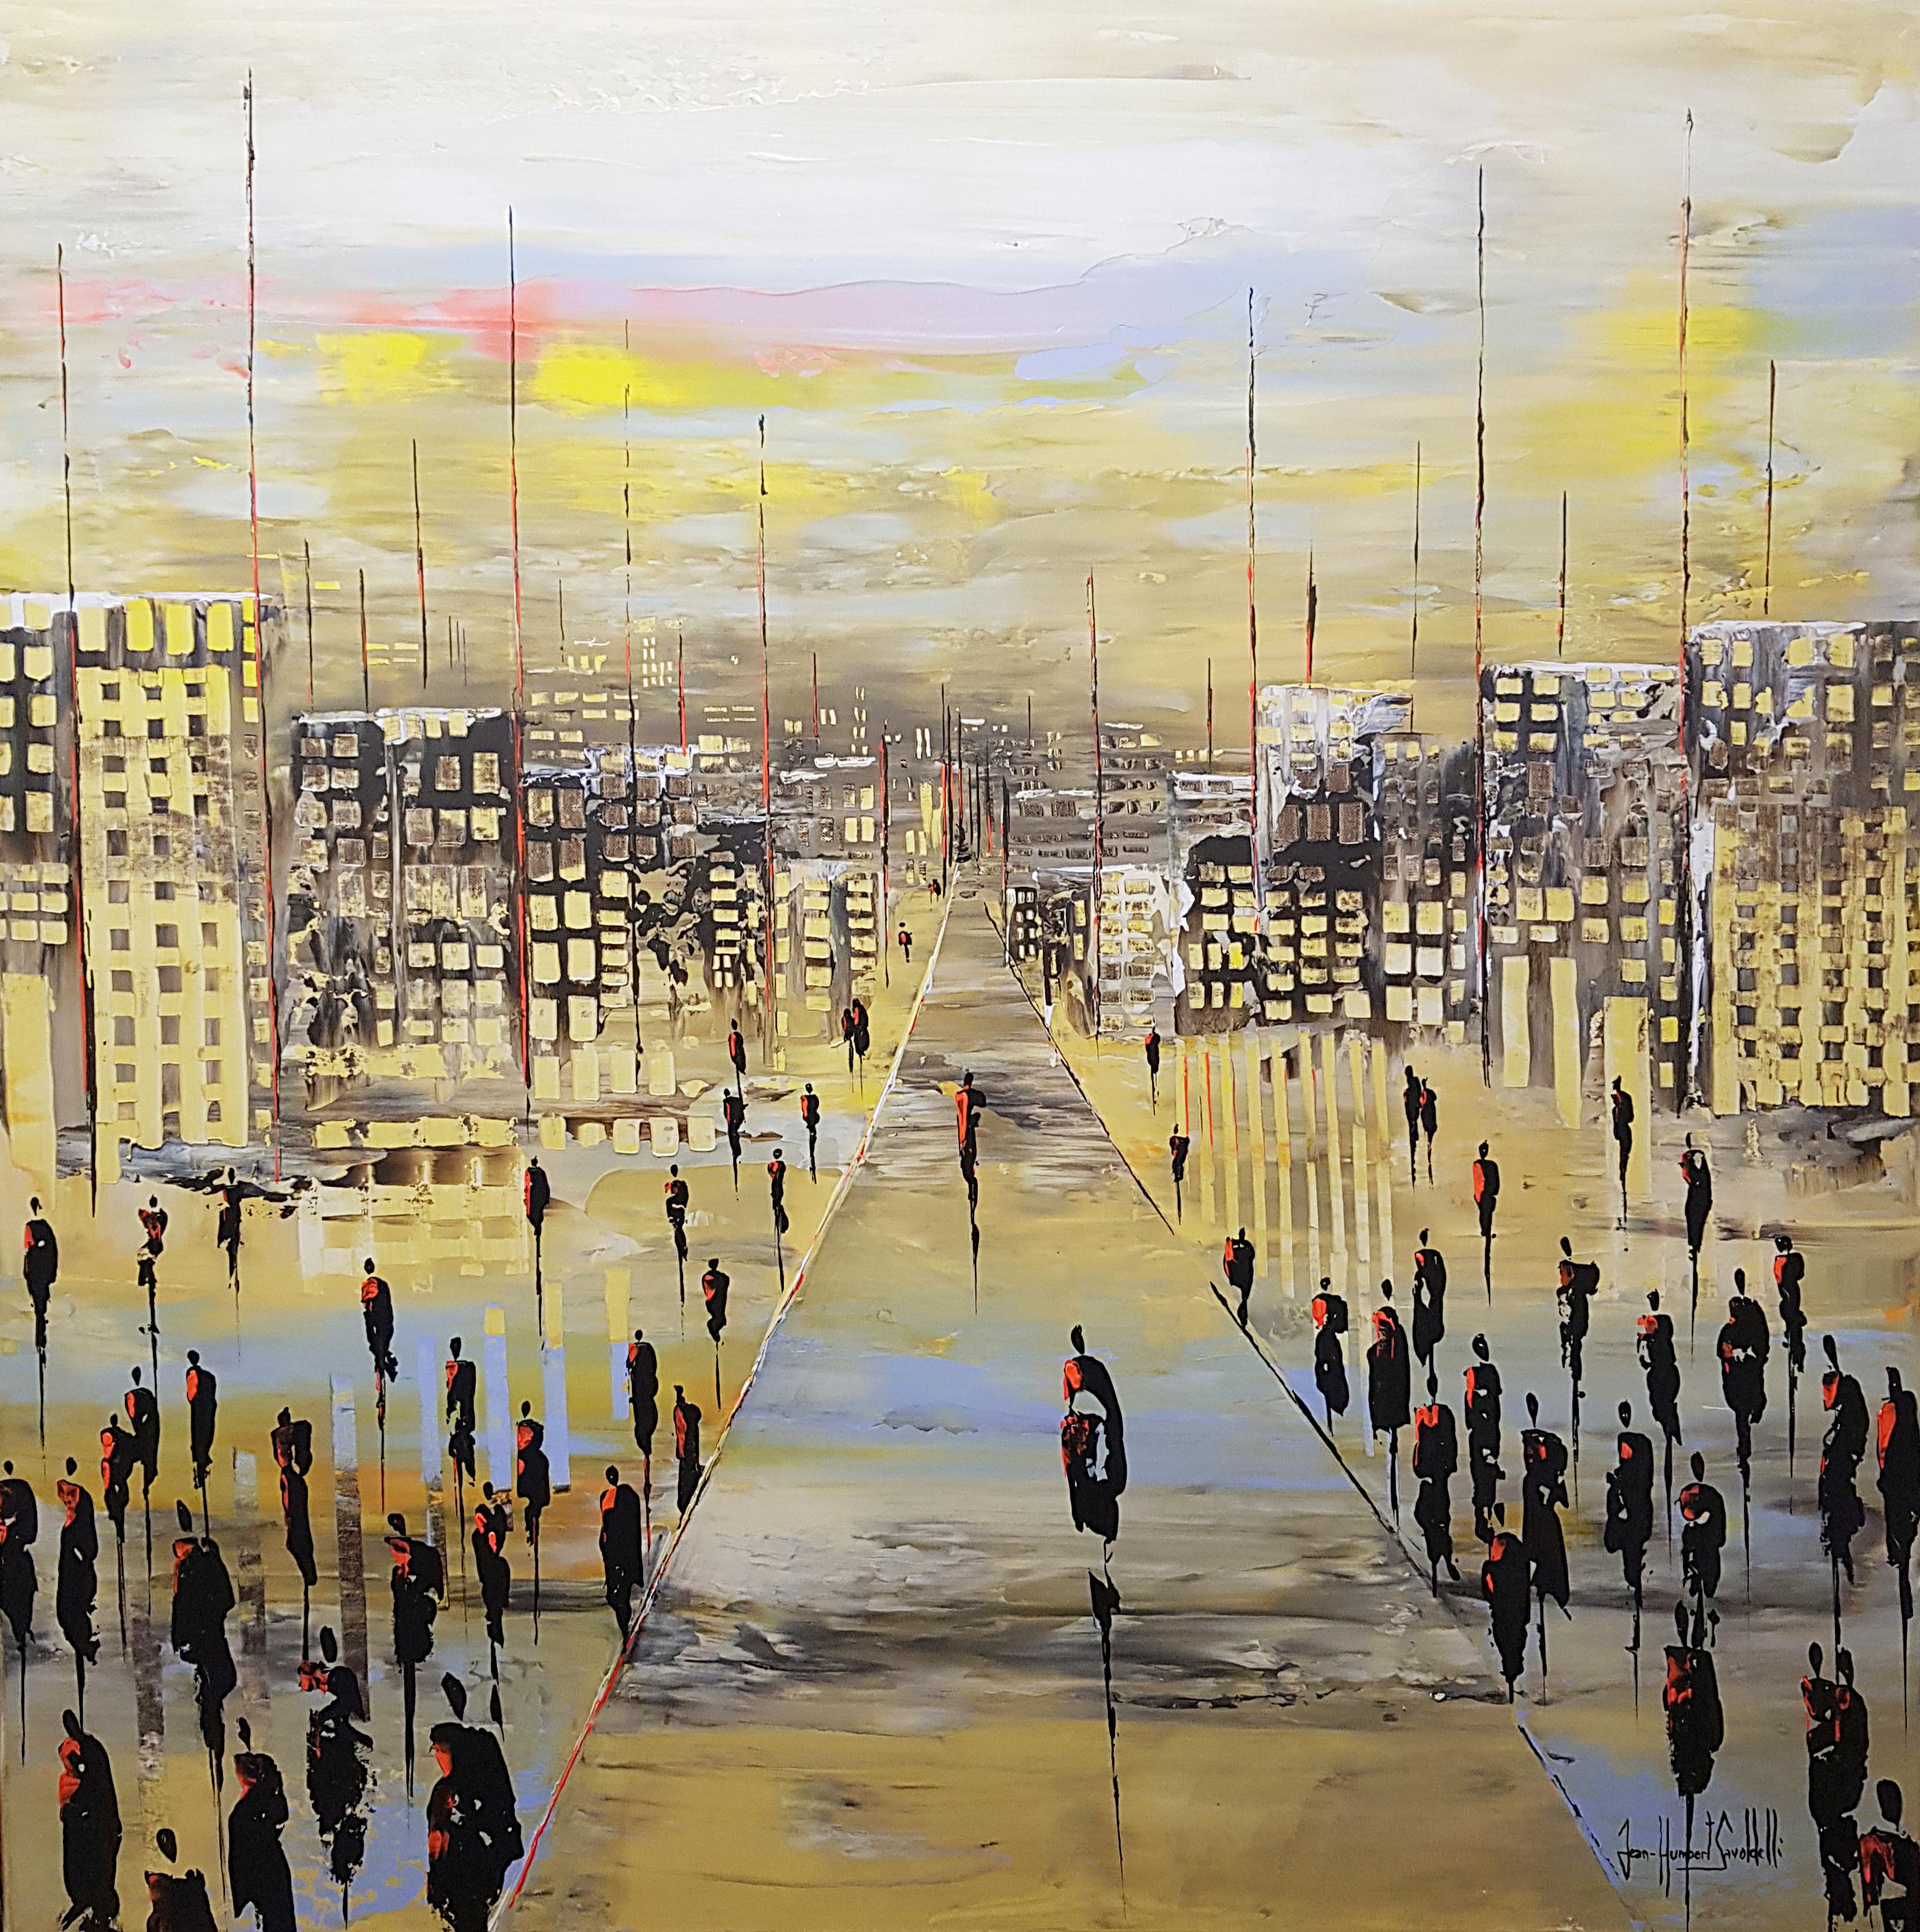 Jean-Humbert Savoldelli Abstract Painting - "Infinitely", Yellow Road, City, People and Buildings Abstract Landscape